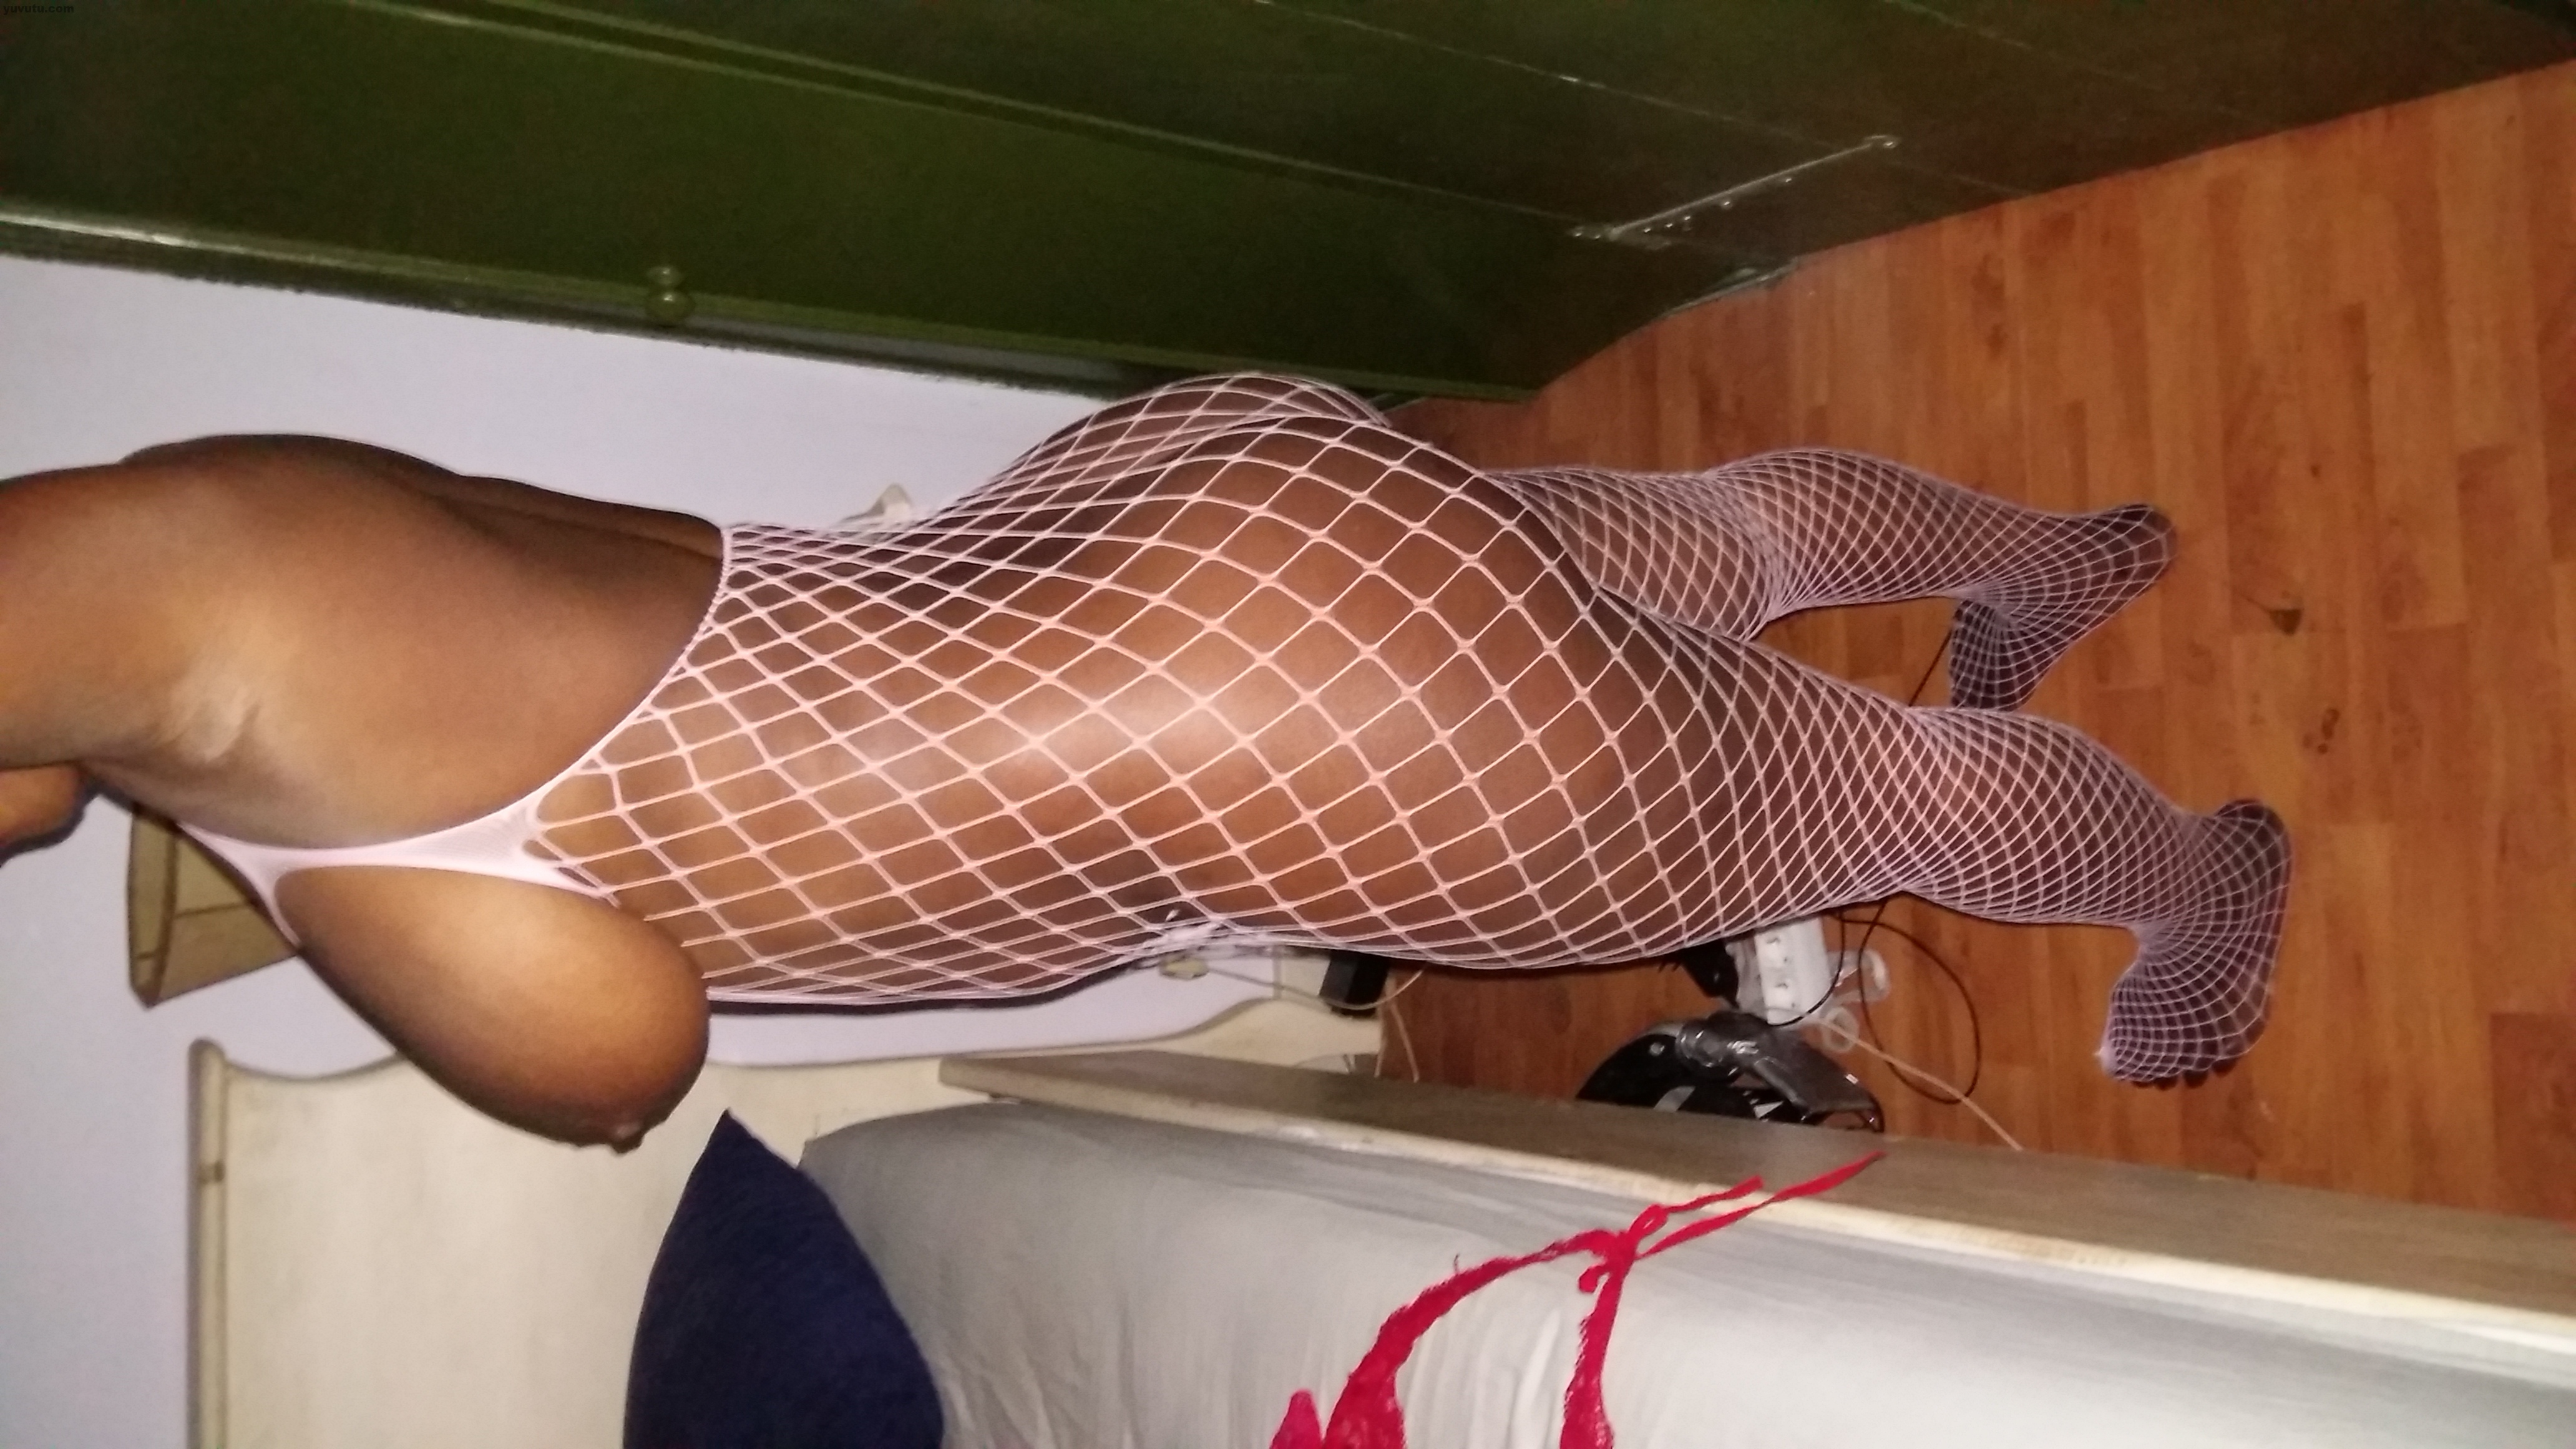 Busty Ebony MILF Ndey in Fishnet Bodystocking On Yuvutu Homemade Amateur Porn Movies And XXX Sex Videos picture